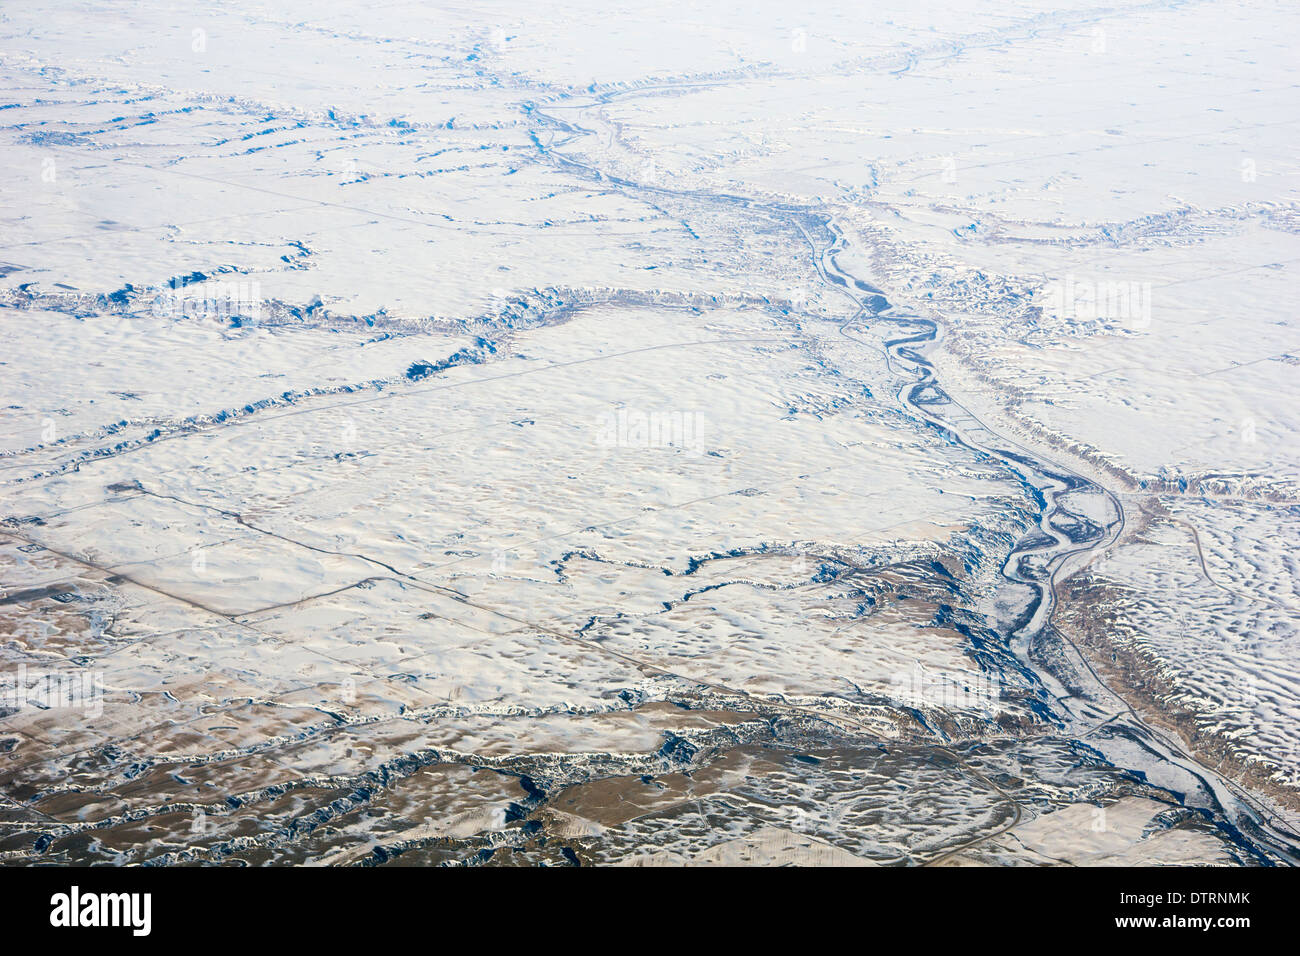 Dendritic river drainage pattern in prairie landscape, aerial view of the snow covered Red Deer River and tributaries, Drumheller, Alberta, Canada Stock Photo